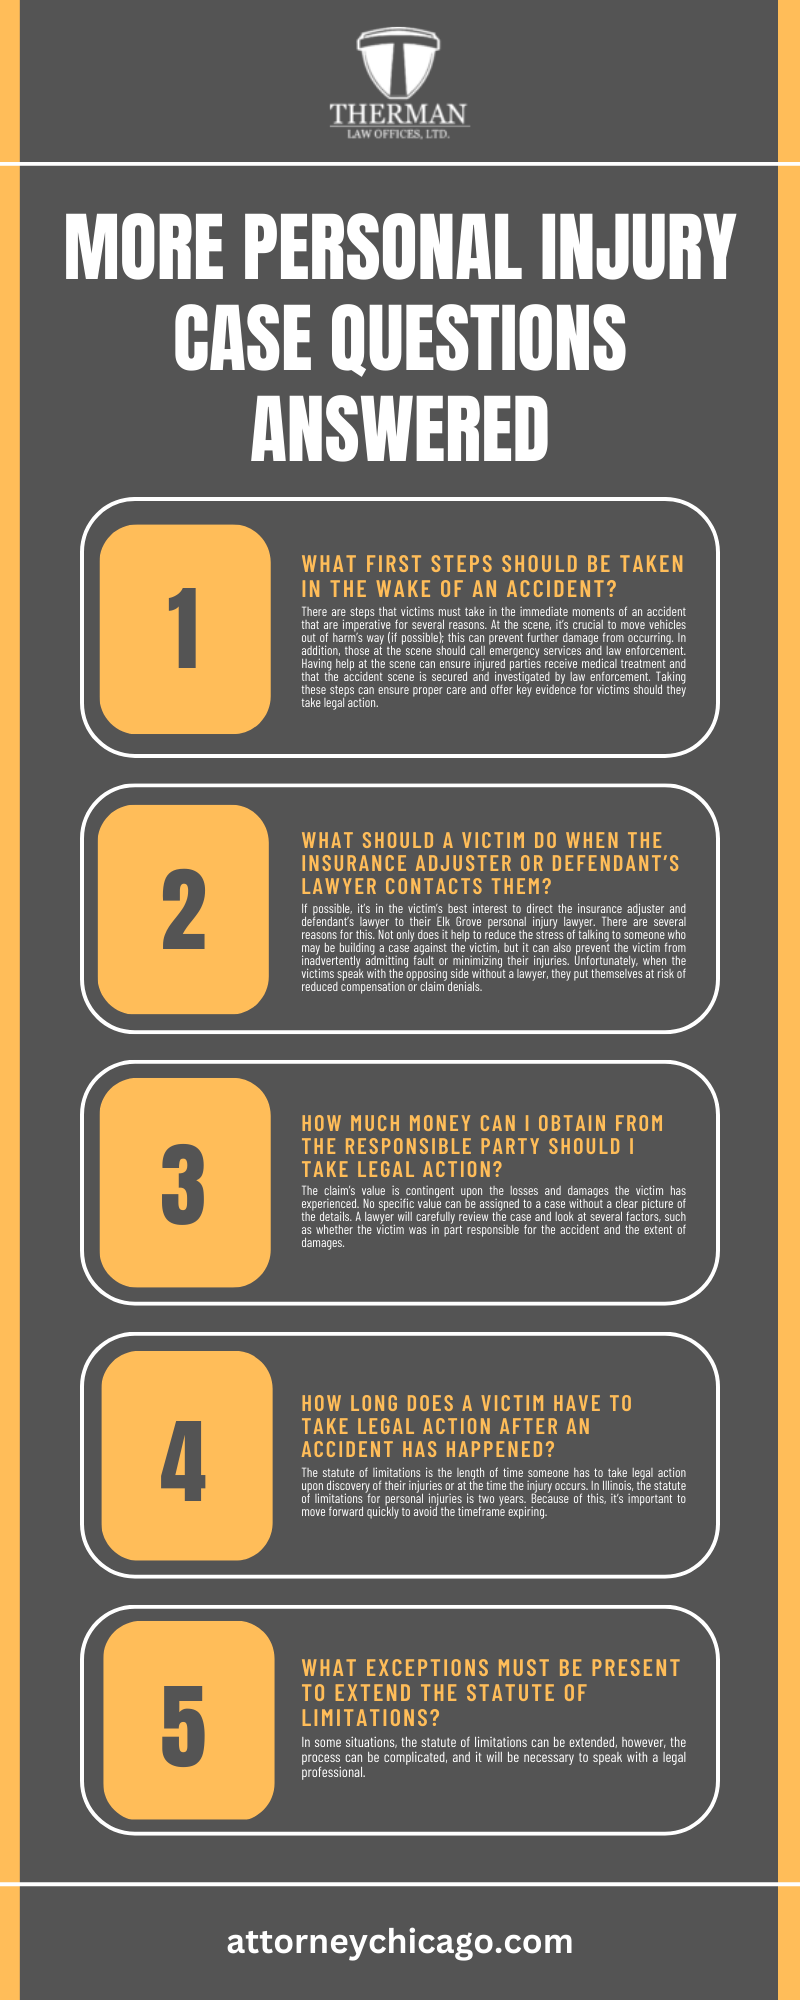 MORE PERSONAL INJURY CASE QUESTIONS ANSWERED INFOGRAPHIC